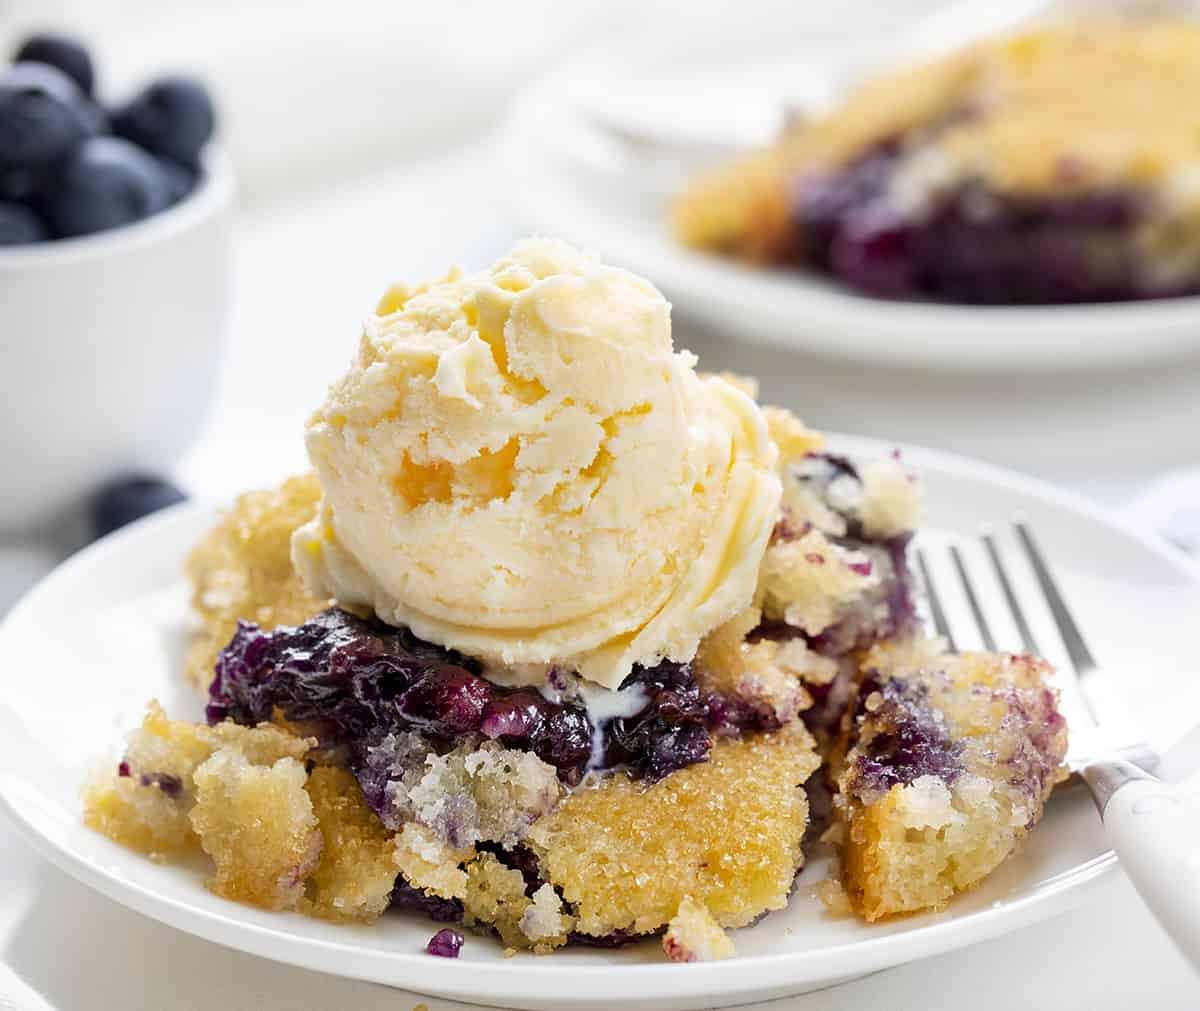 Plate with Blueberry Cobbler On It With Scoop of Ice Cream. Dessert, Cobbler, Blueberry Cobbler, Easy Summer Desserts, Summer Dessert, Blueberry Dessert, i am baker, iambaker.